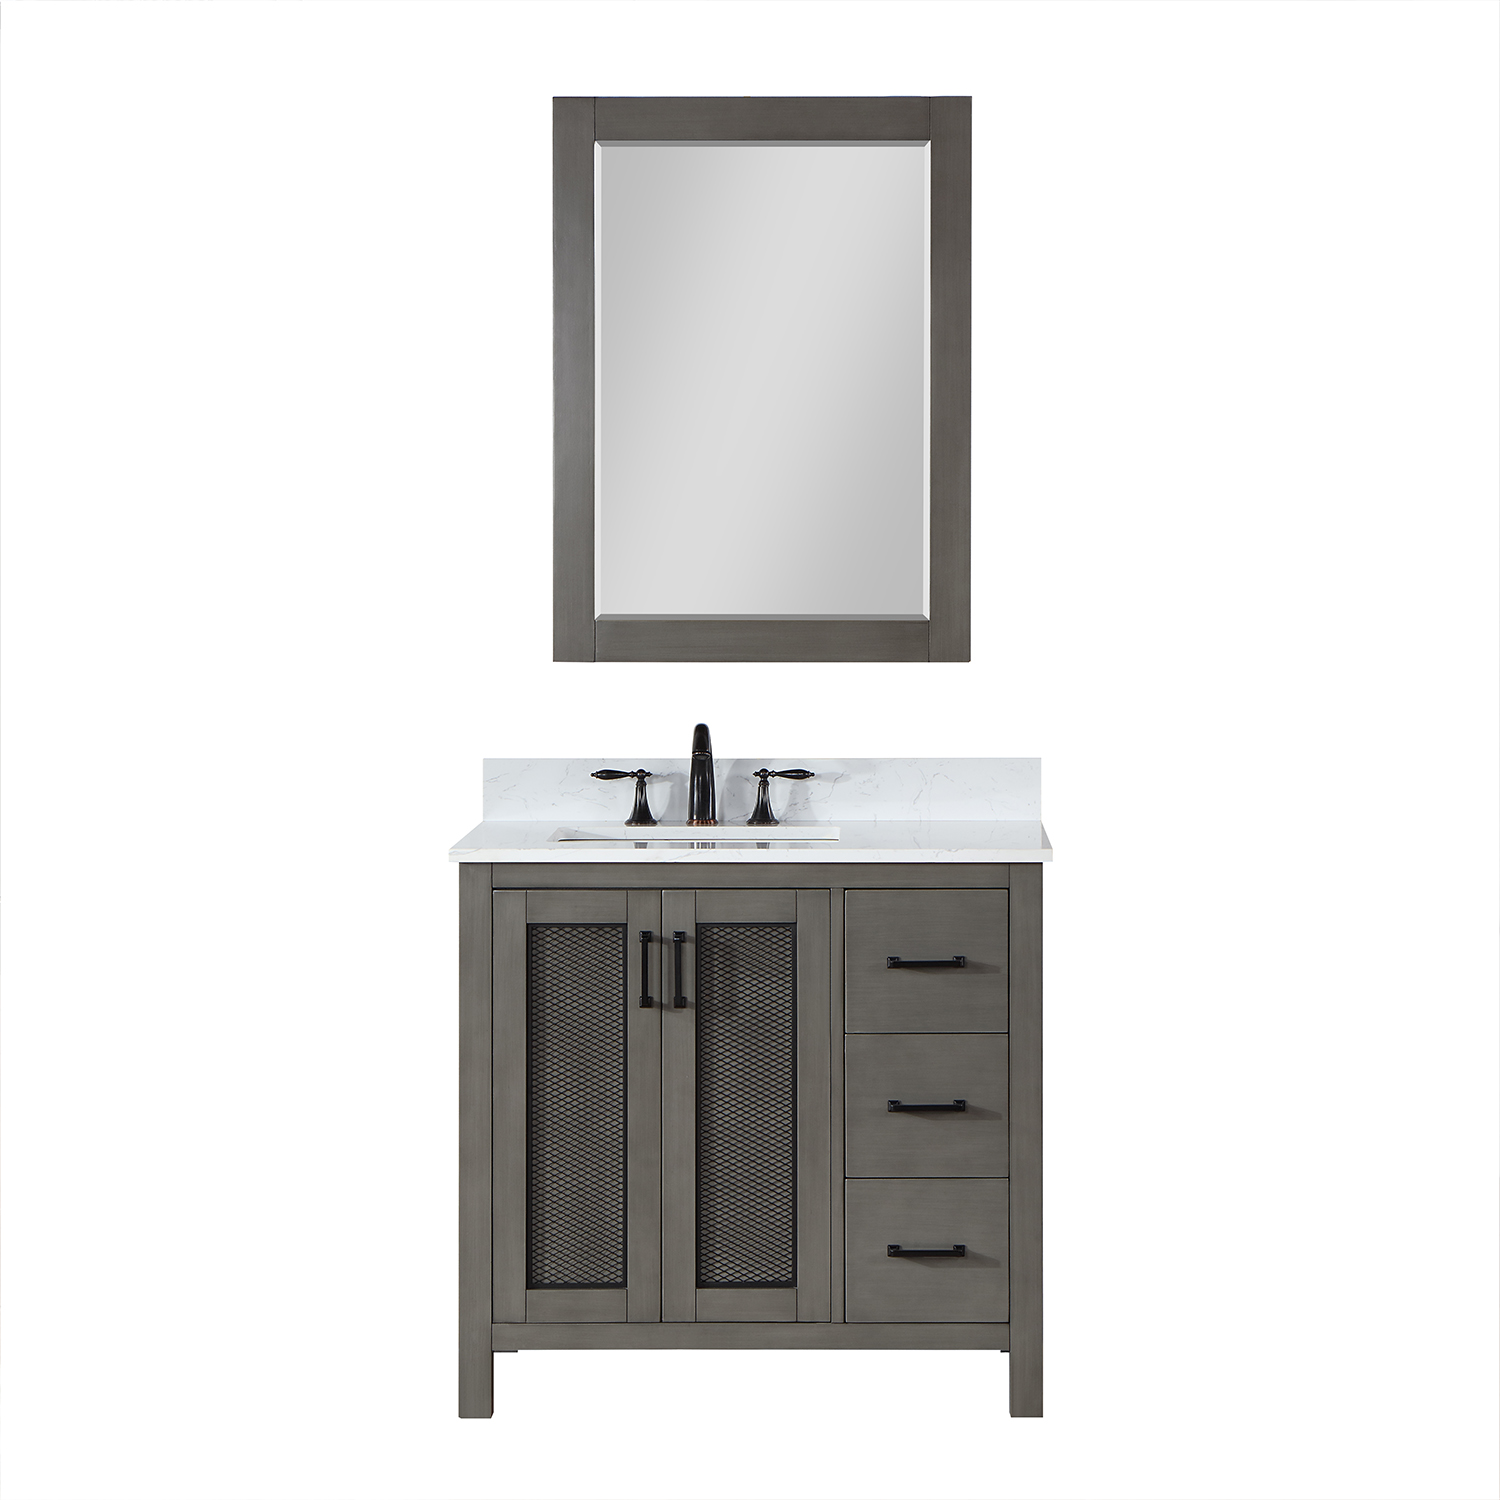 Issac Edwards Collection 36" Single Bathroom Vanity Set in Gray Pine with Carrara White Composite Stone Countertop without Mirror 